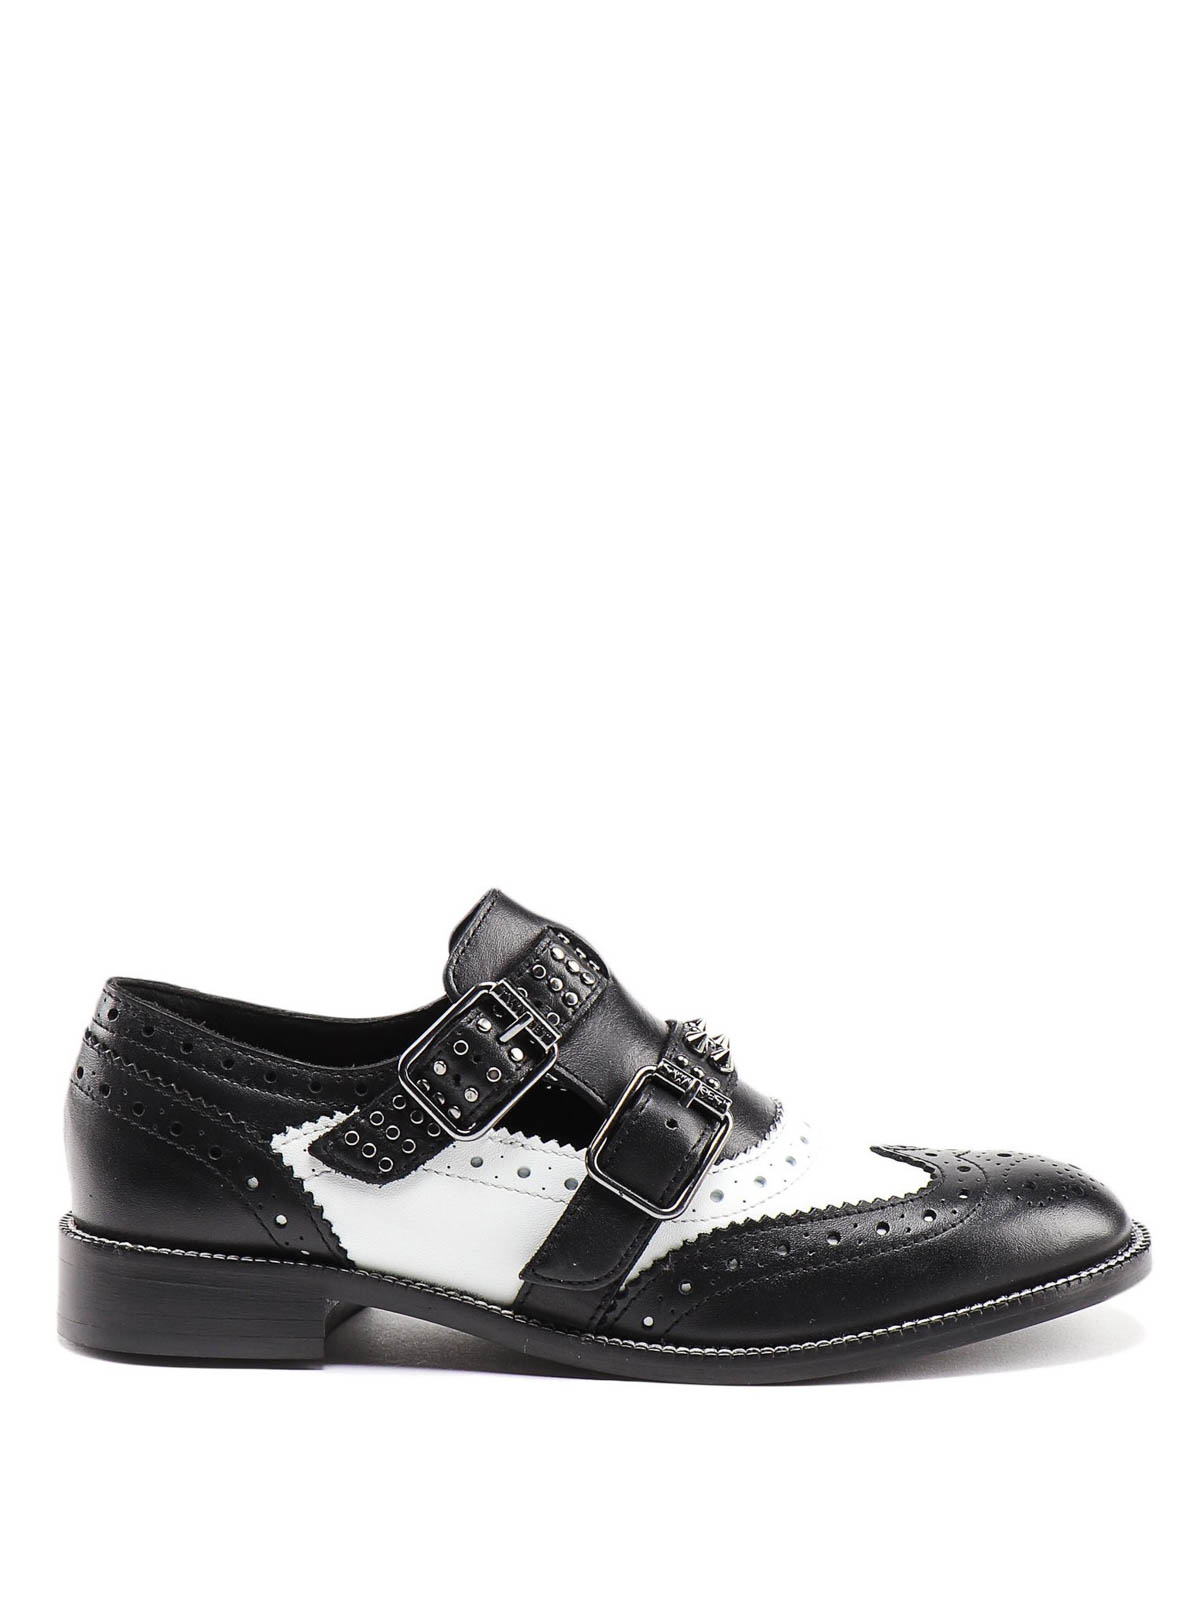 Twinset Stud Detailed Brogue Monk Strap Shoes In Black